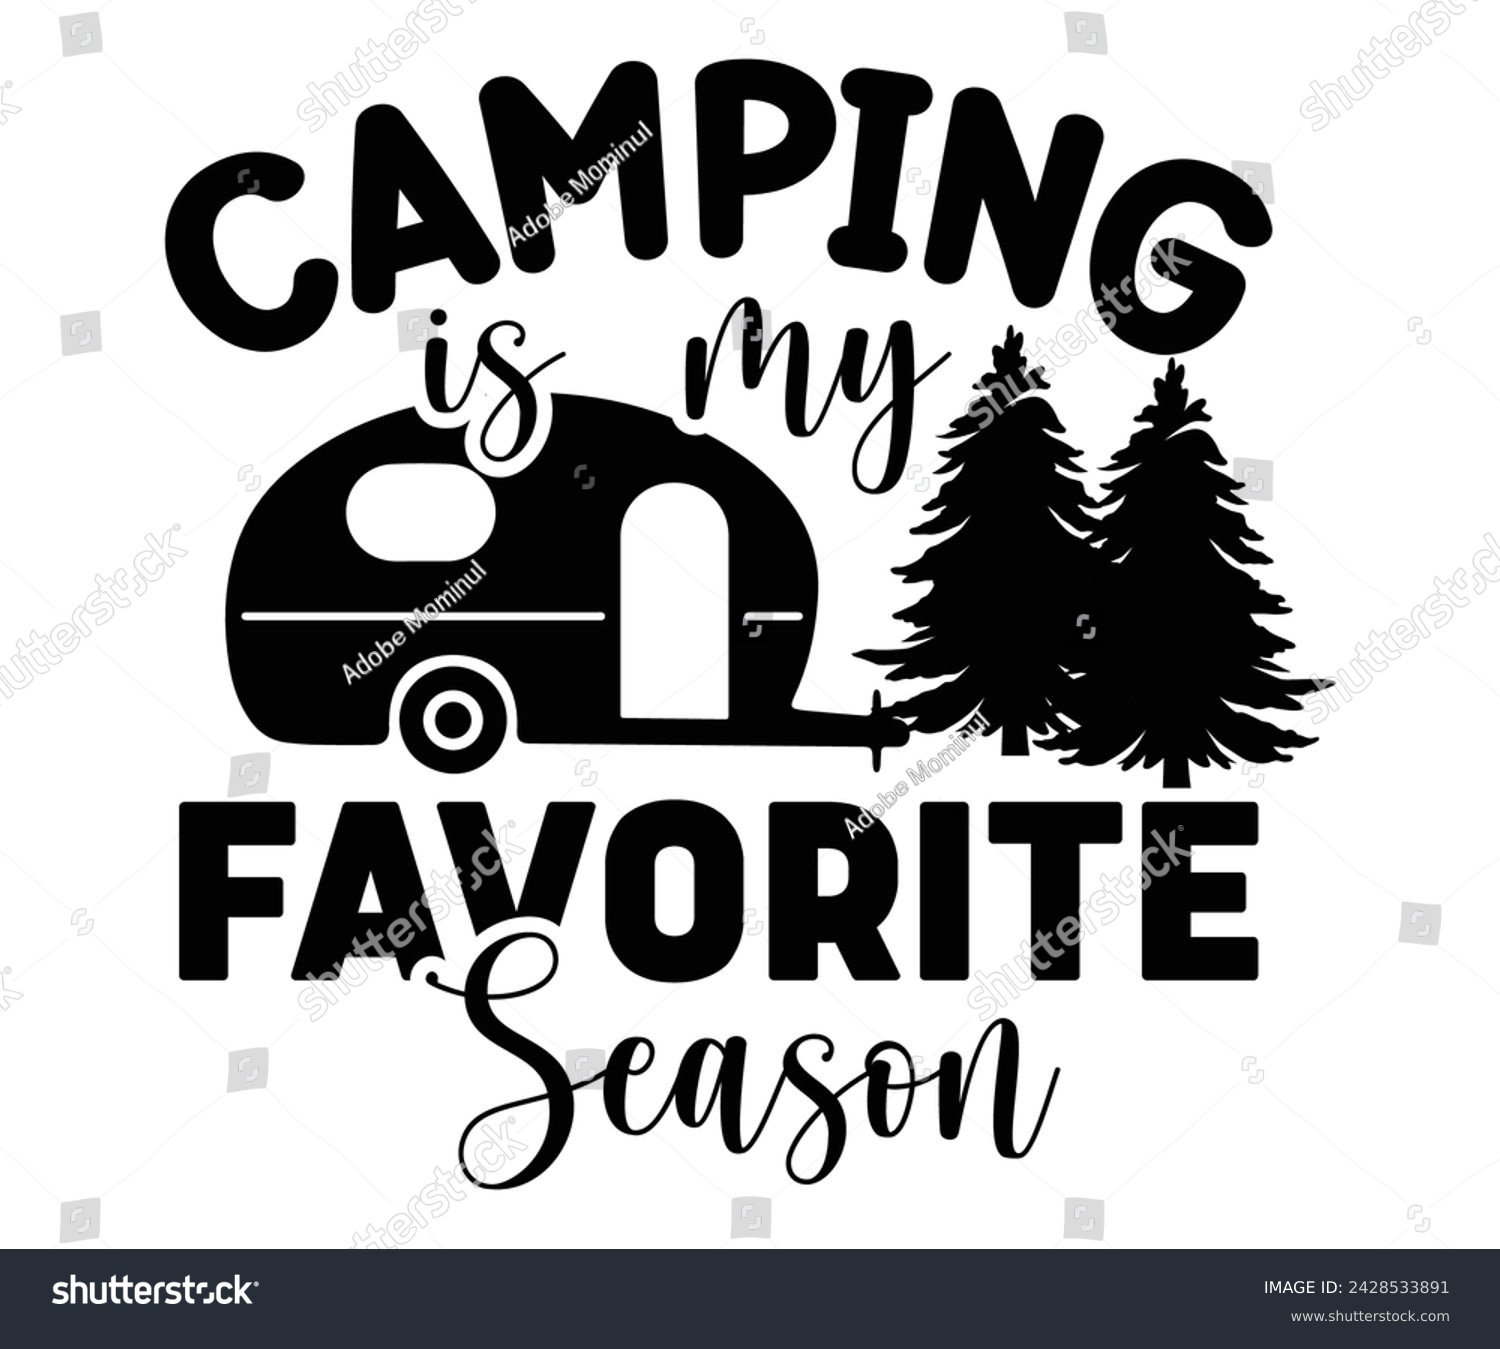 SVG of Camping Is My Favorite Season,Happy Camper Svg,Camping Svg,Adventure Svg,Hiking Svg,Camp Saying,Camp Life Svg,Svg Cut Files, Png,Mountain T-shirt,Instant Download svg